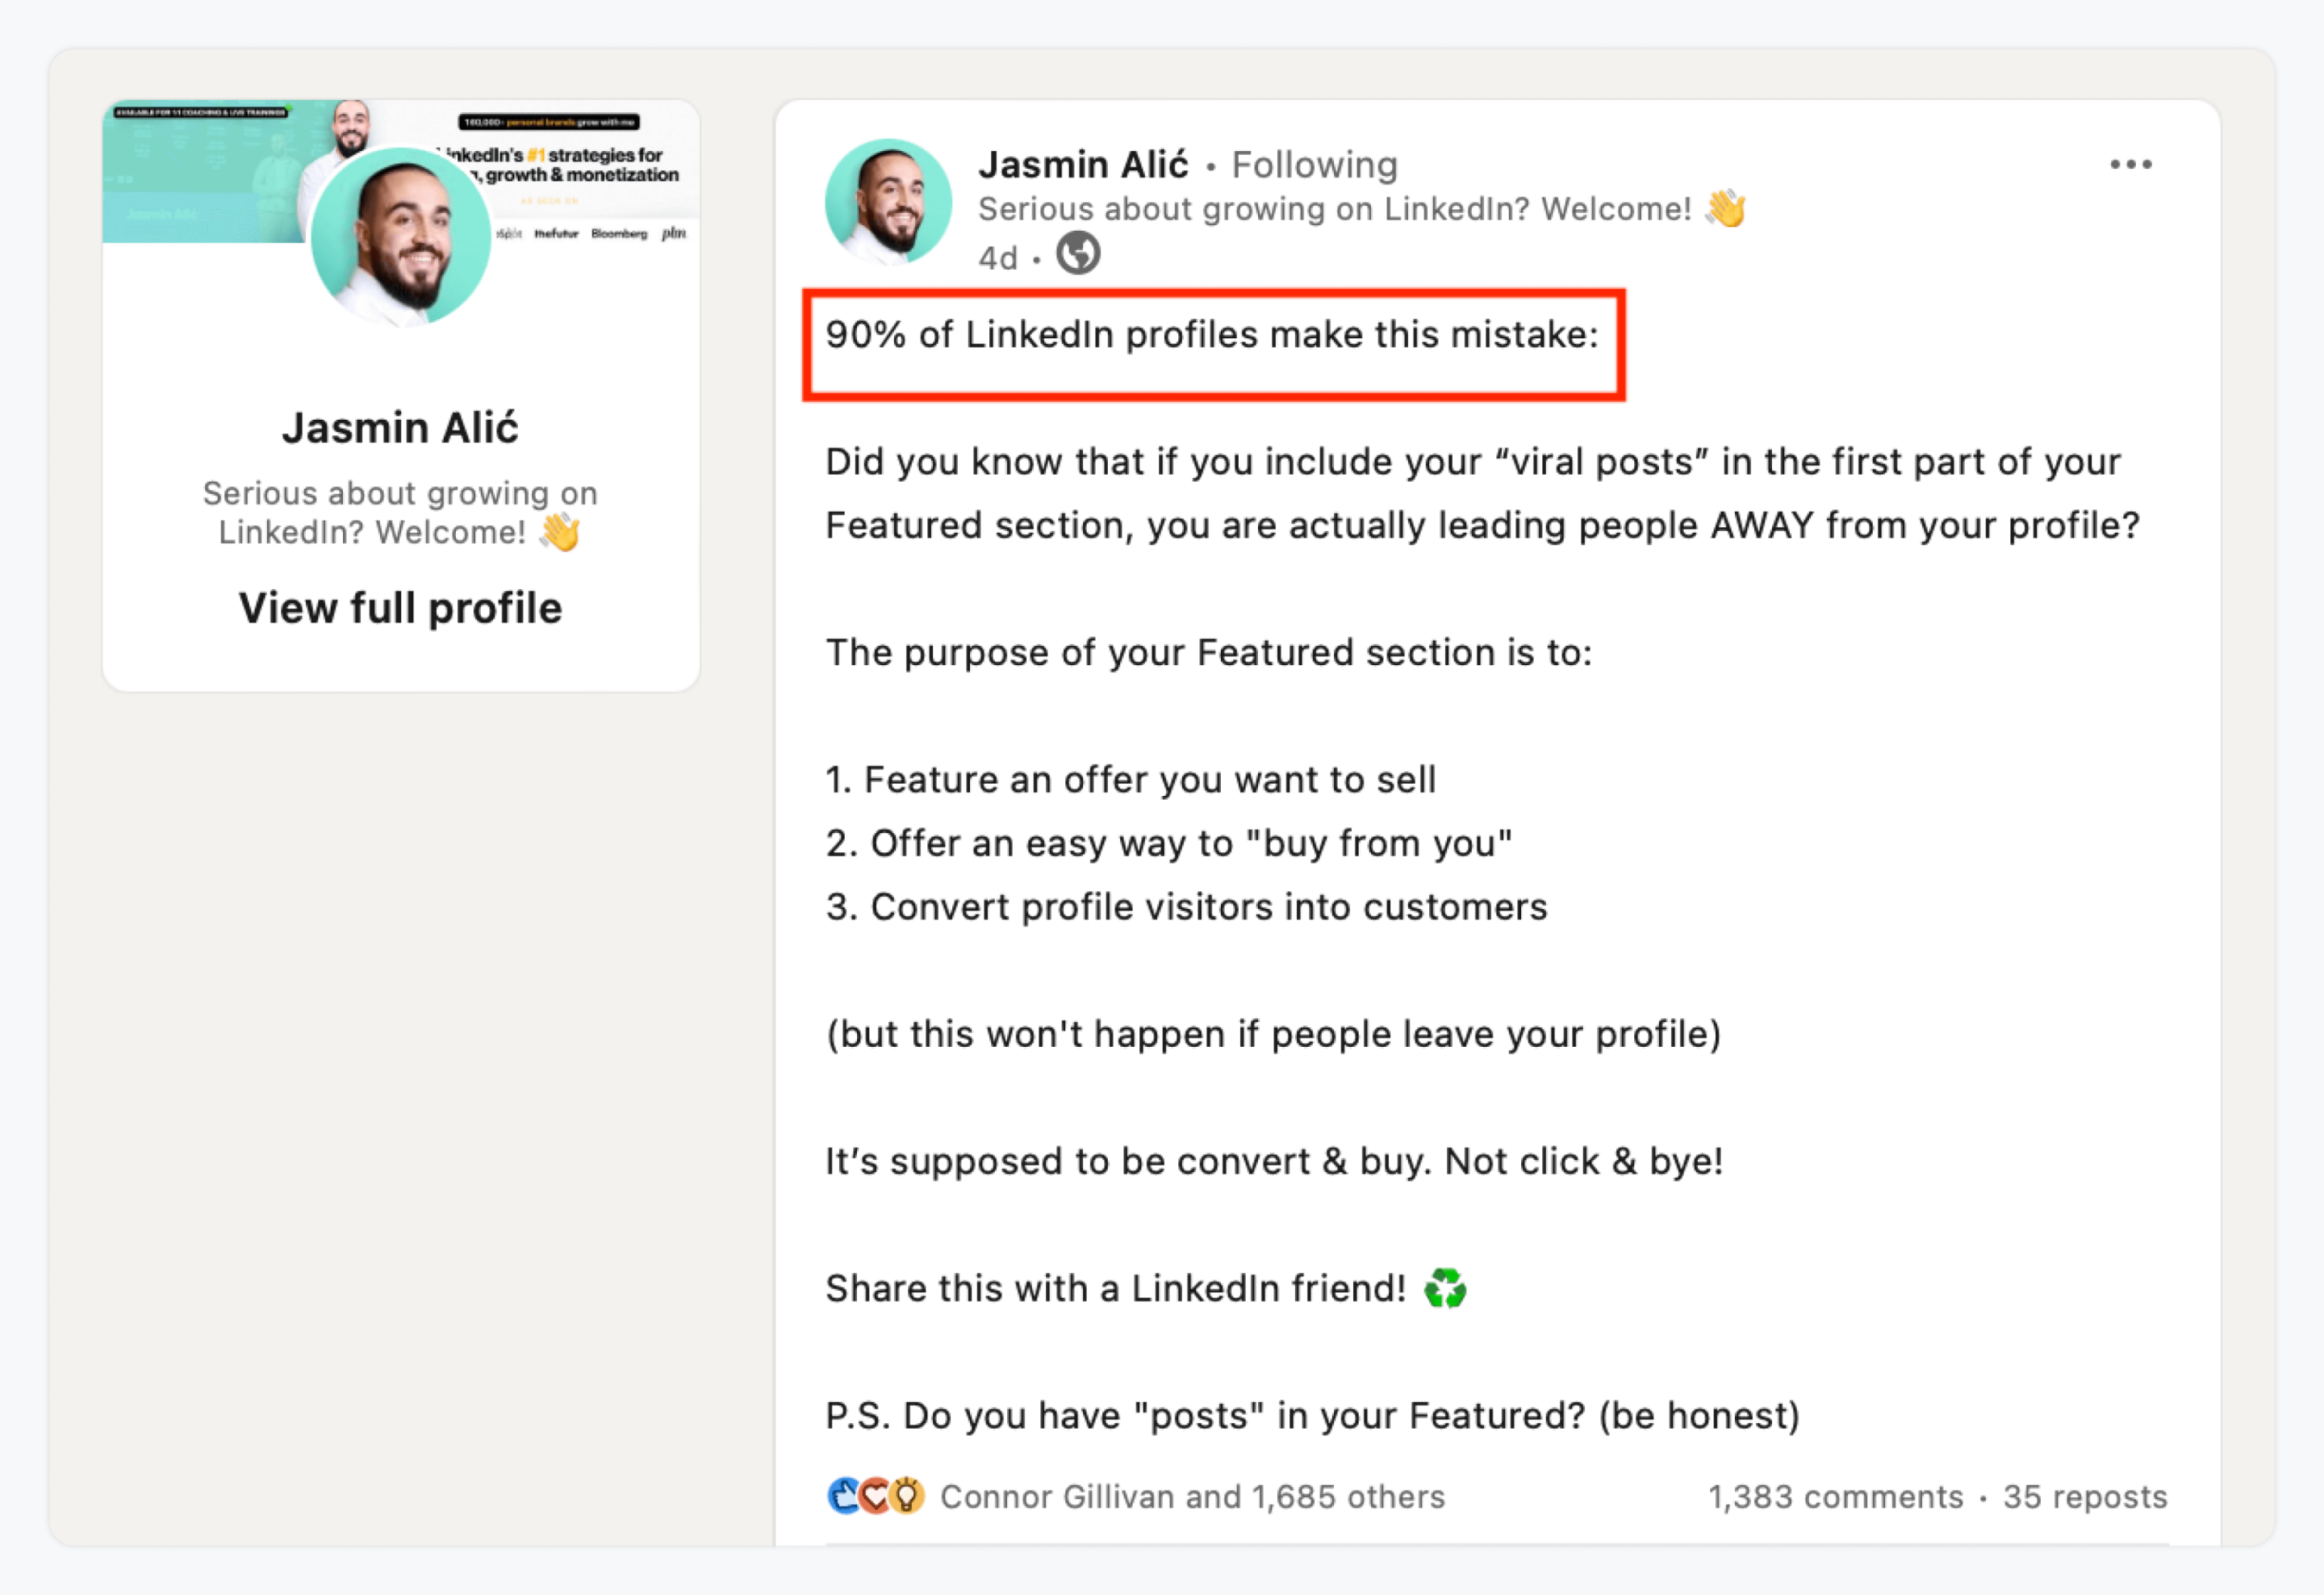 The image shows an example of a strong hook used on LinkedIn post